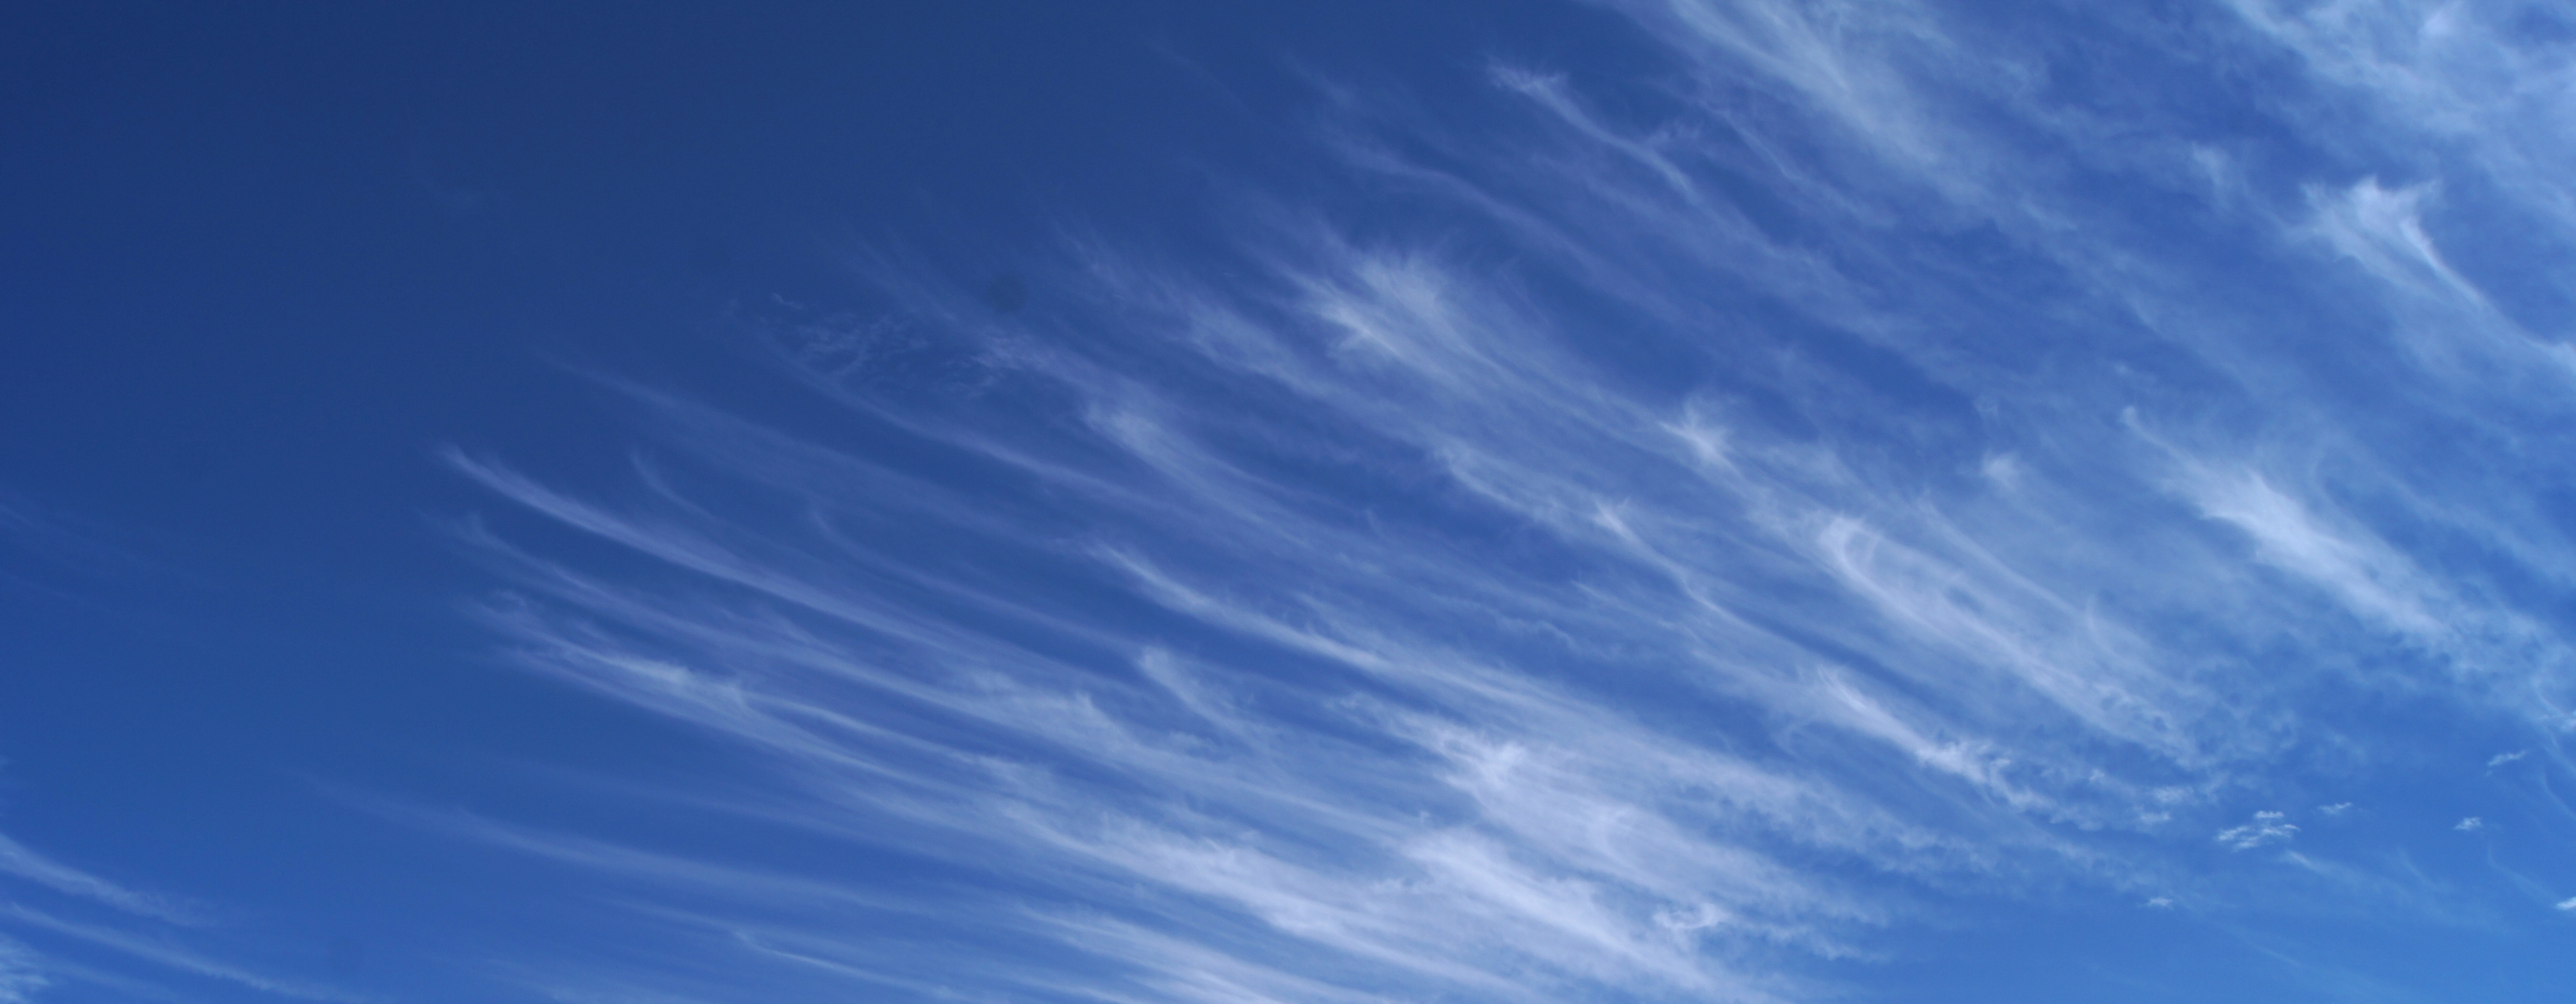 Cirrus Clouds Drawing at GetDrawings.com | Free for personal use ...